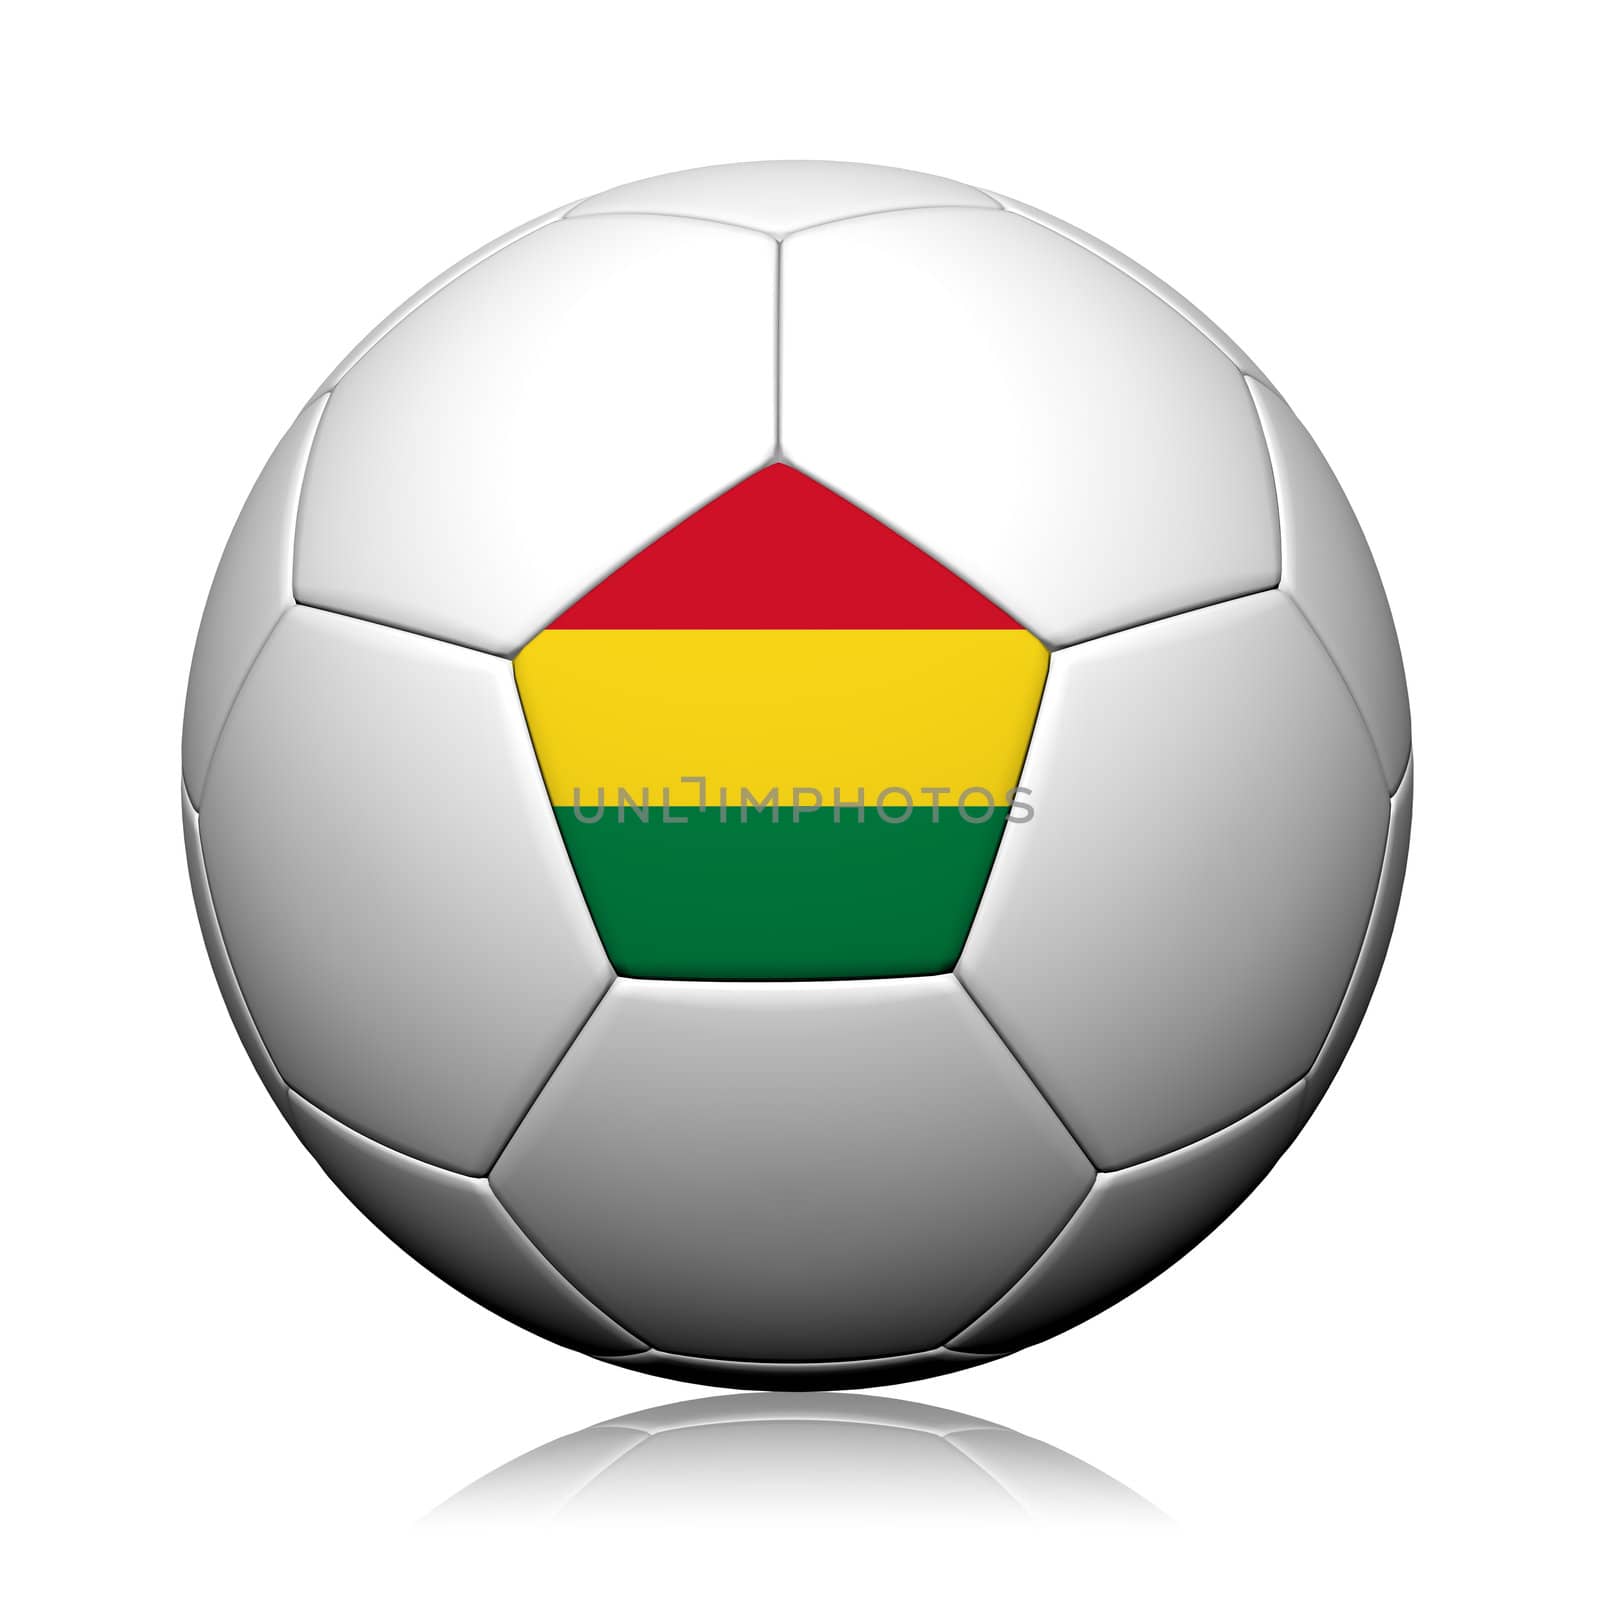 Bolivia Flag Pattern 3d rendering of a soccer ball